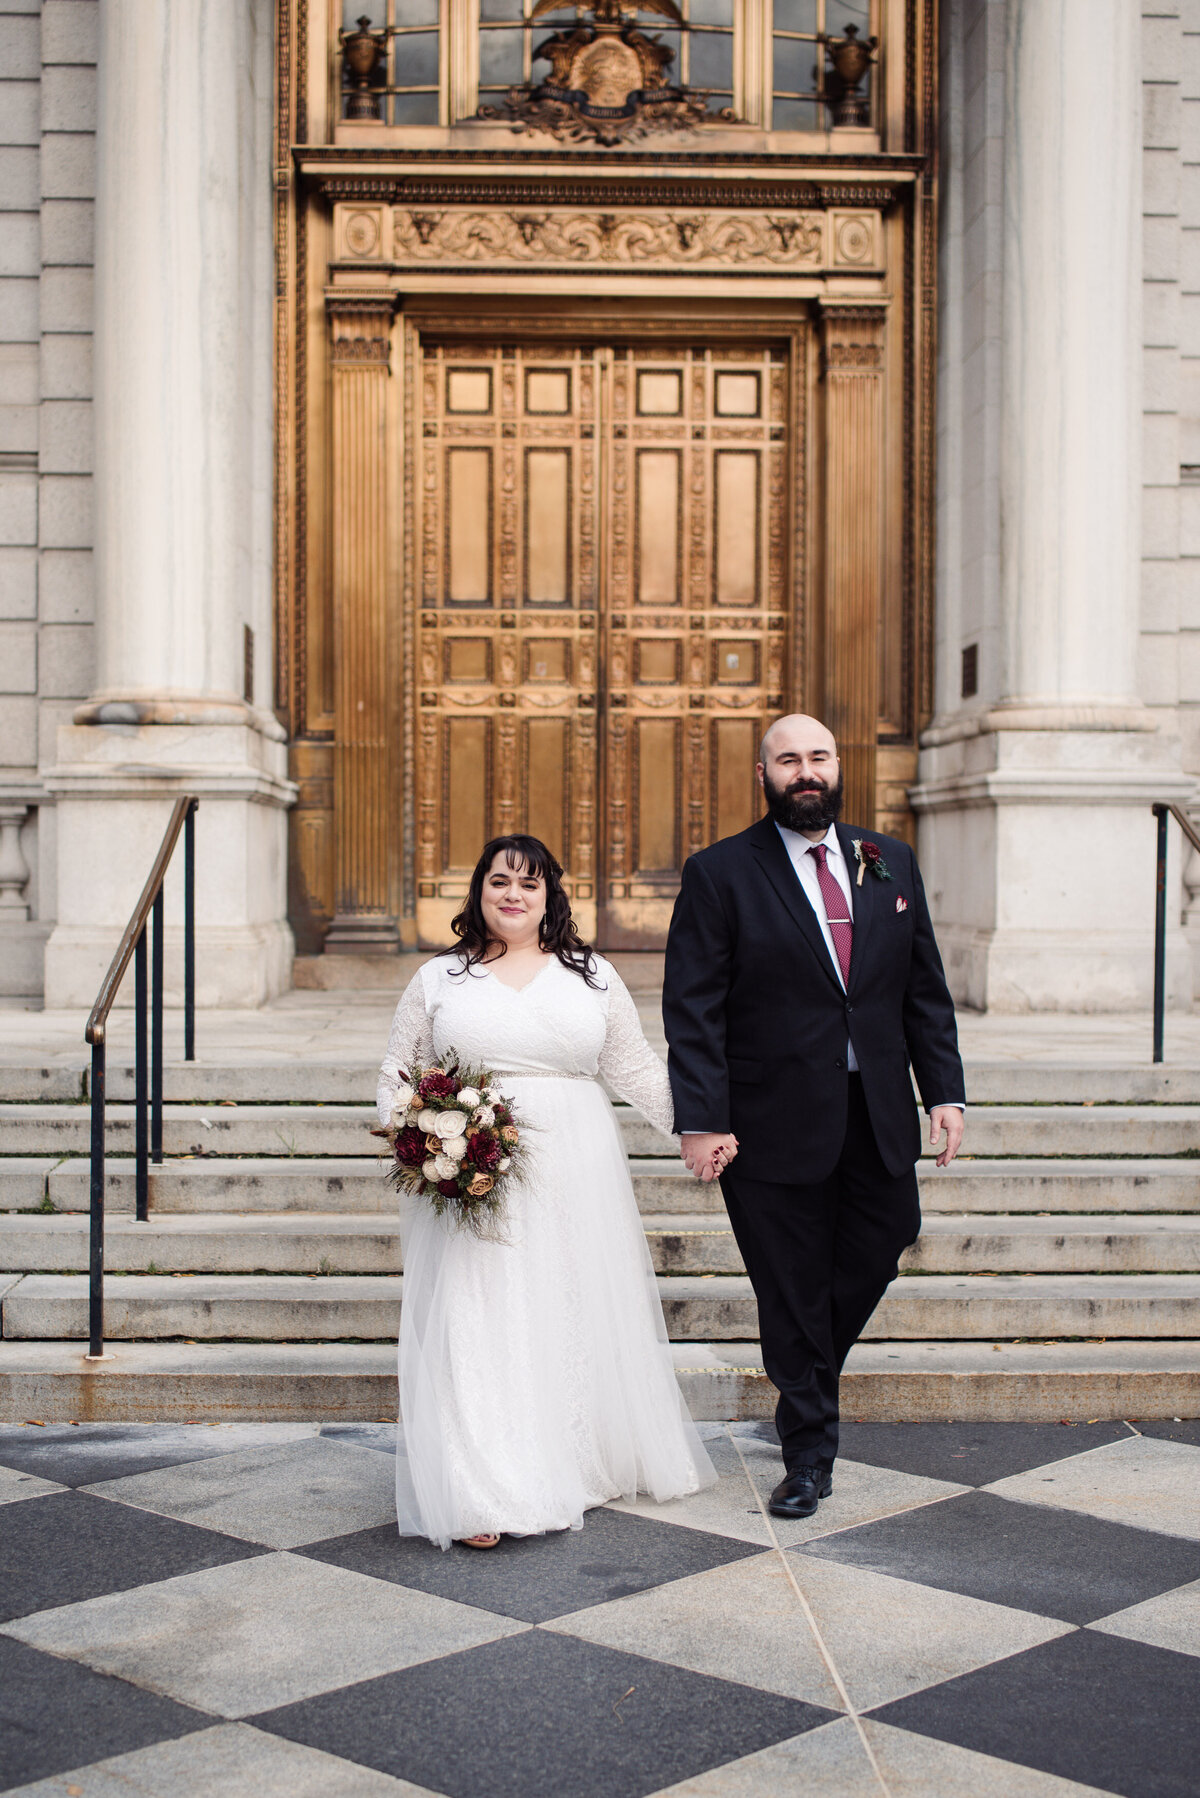 Couple exists Hartford City hall in CT after marrying.